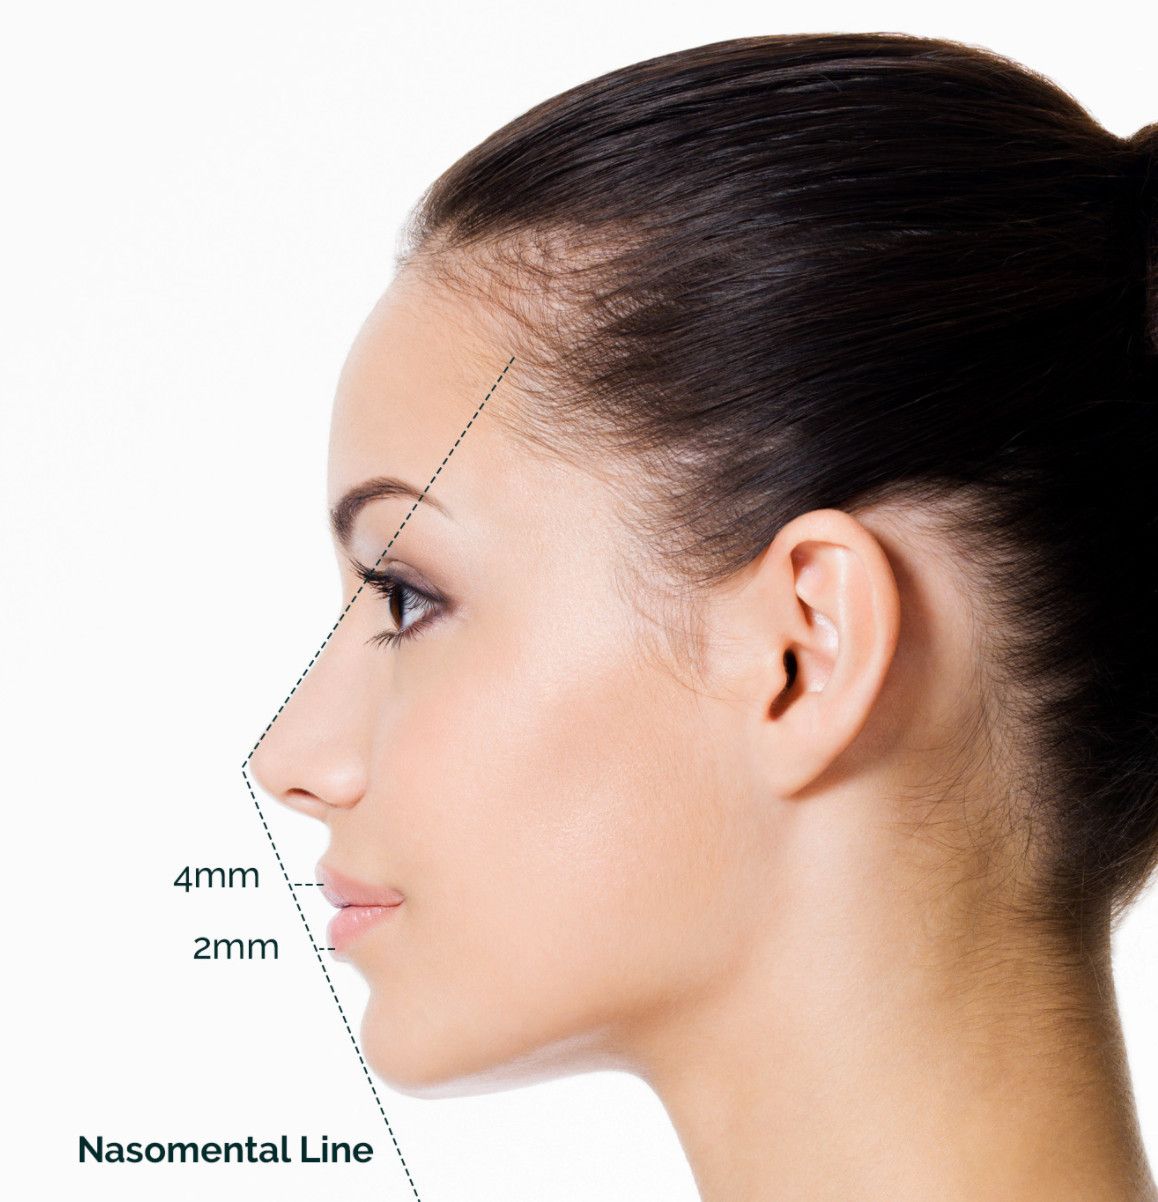 Profile of a woman with perfect facial proportions marked with nasomental line